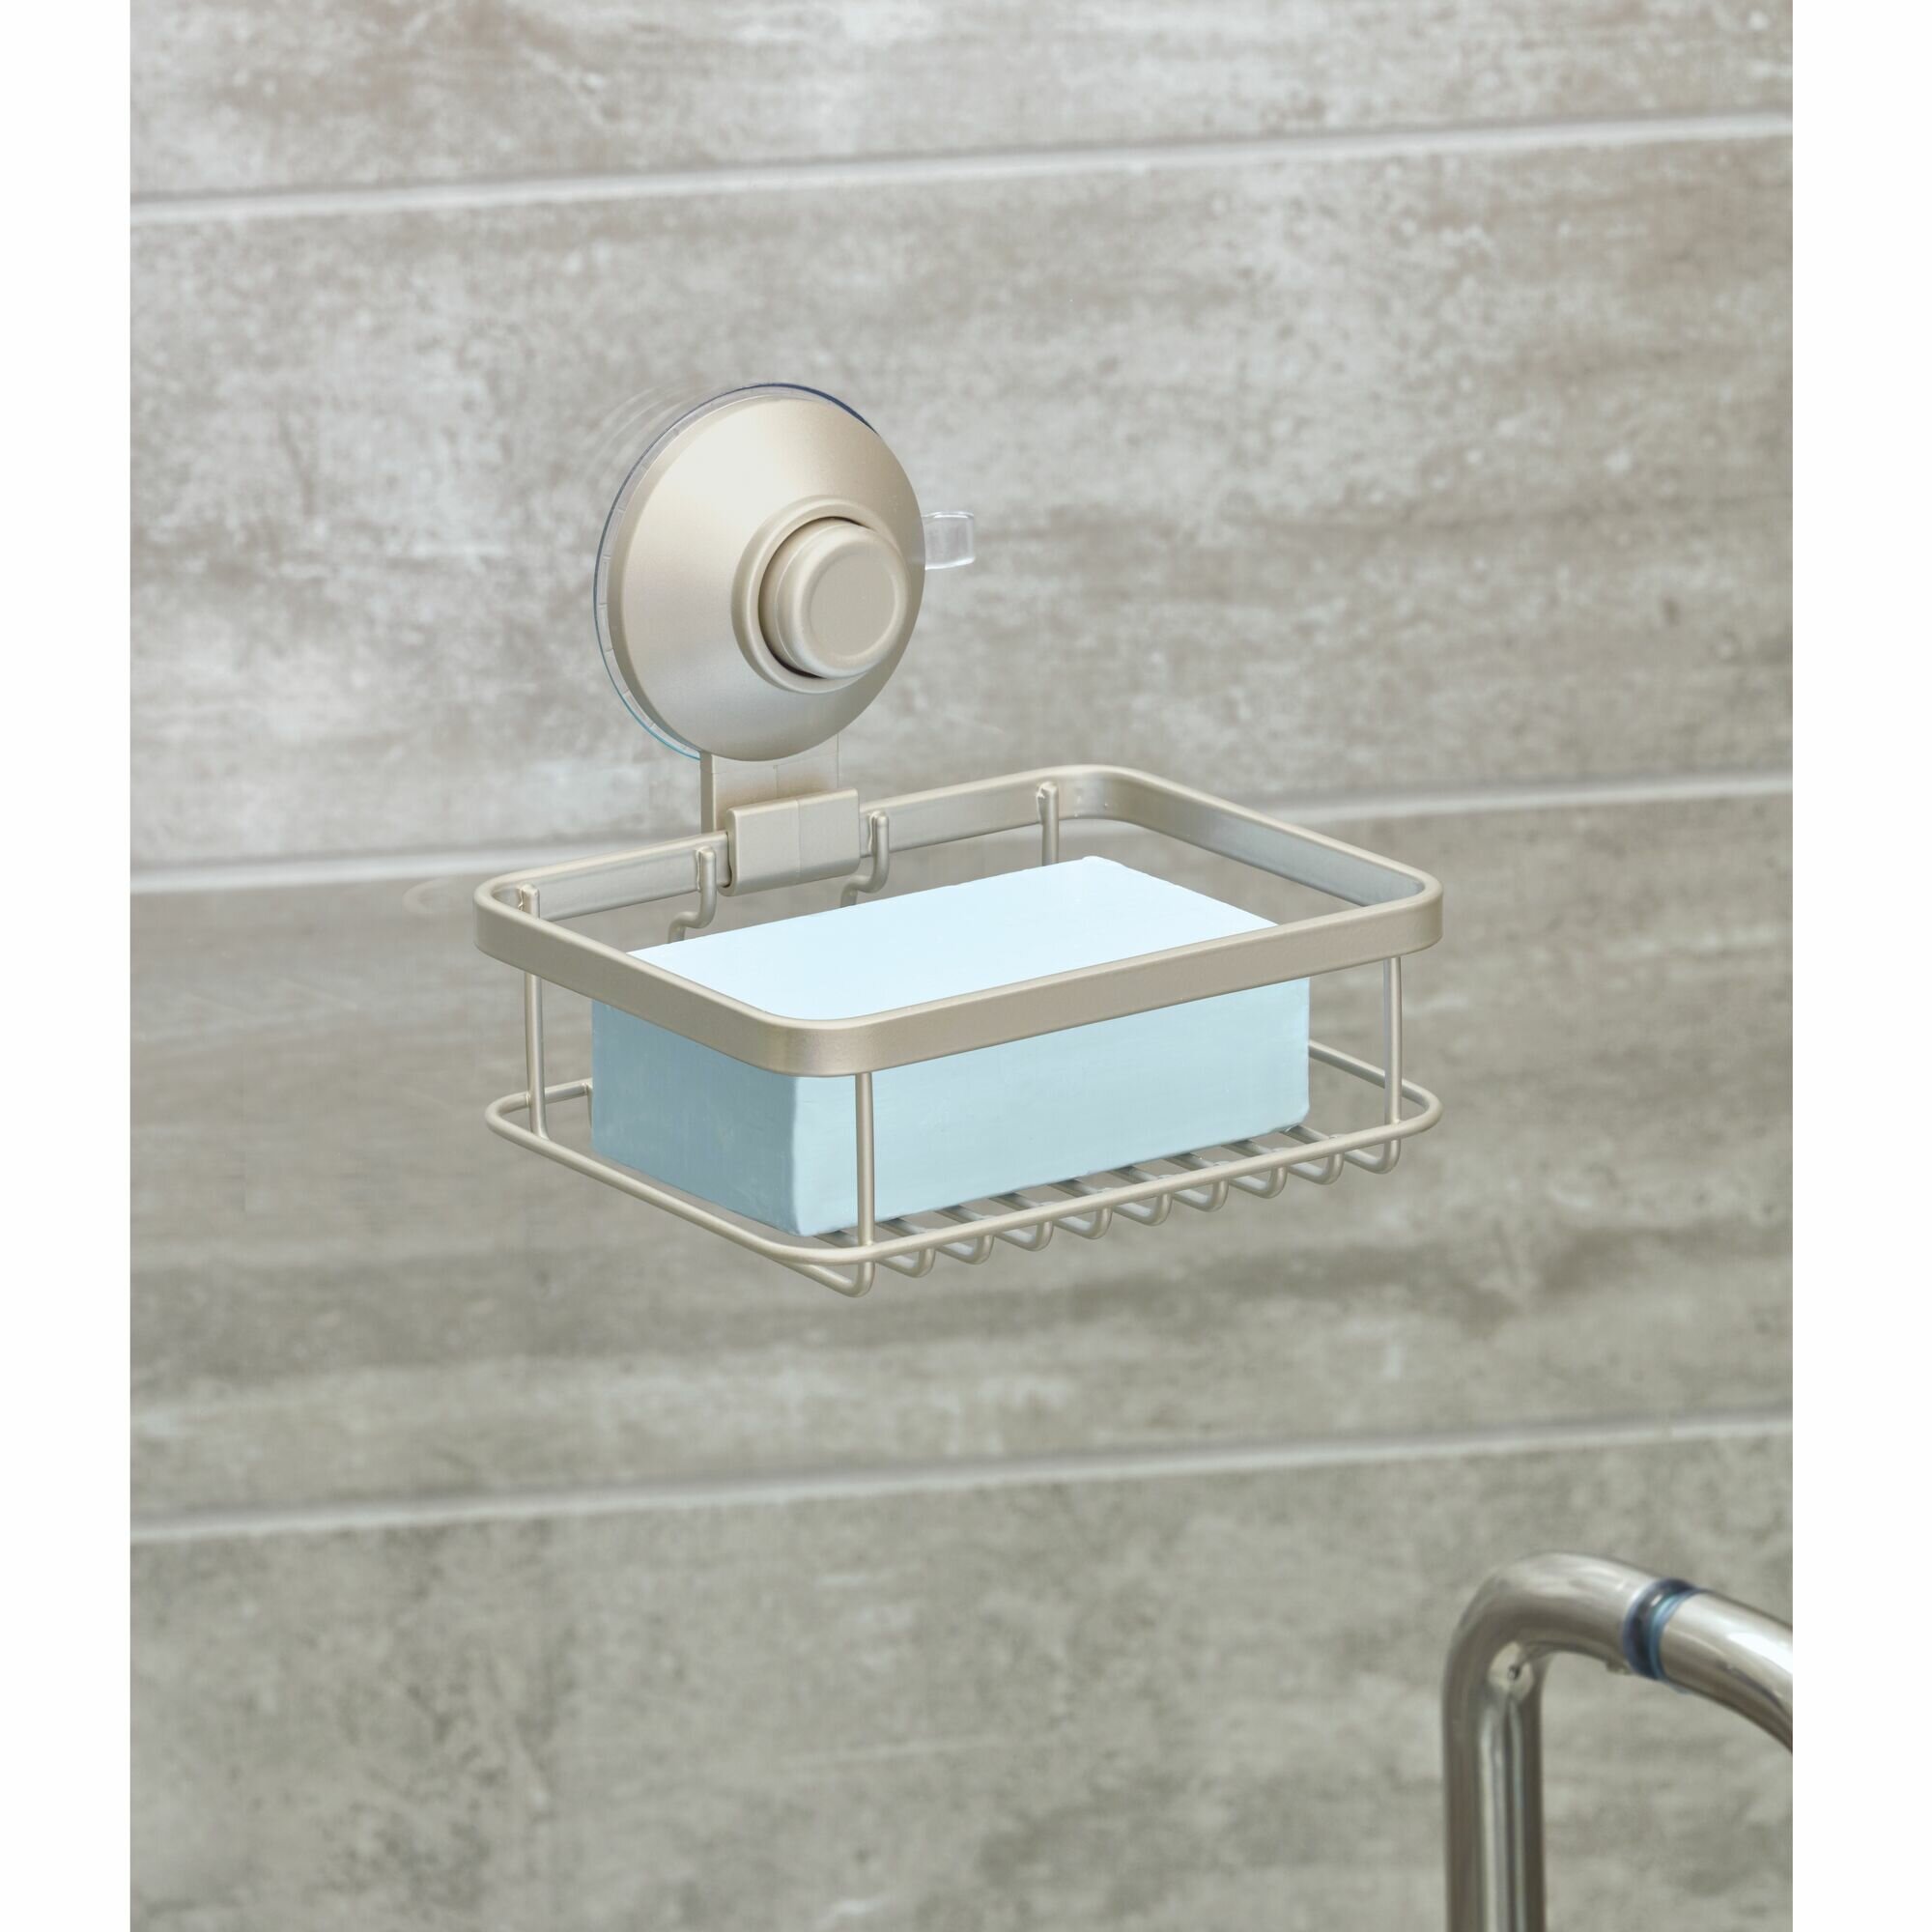 Super Powerful Vacuum Suction Shower Soap Holder Details about   Suction Soap Dish with Hooks 